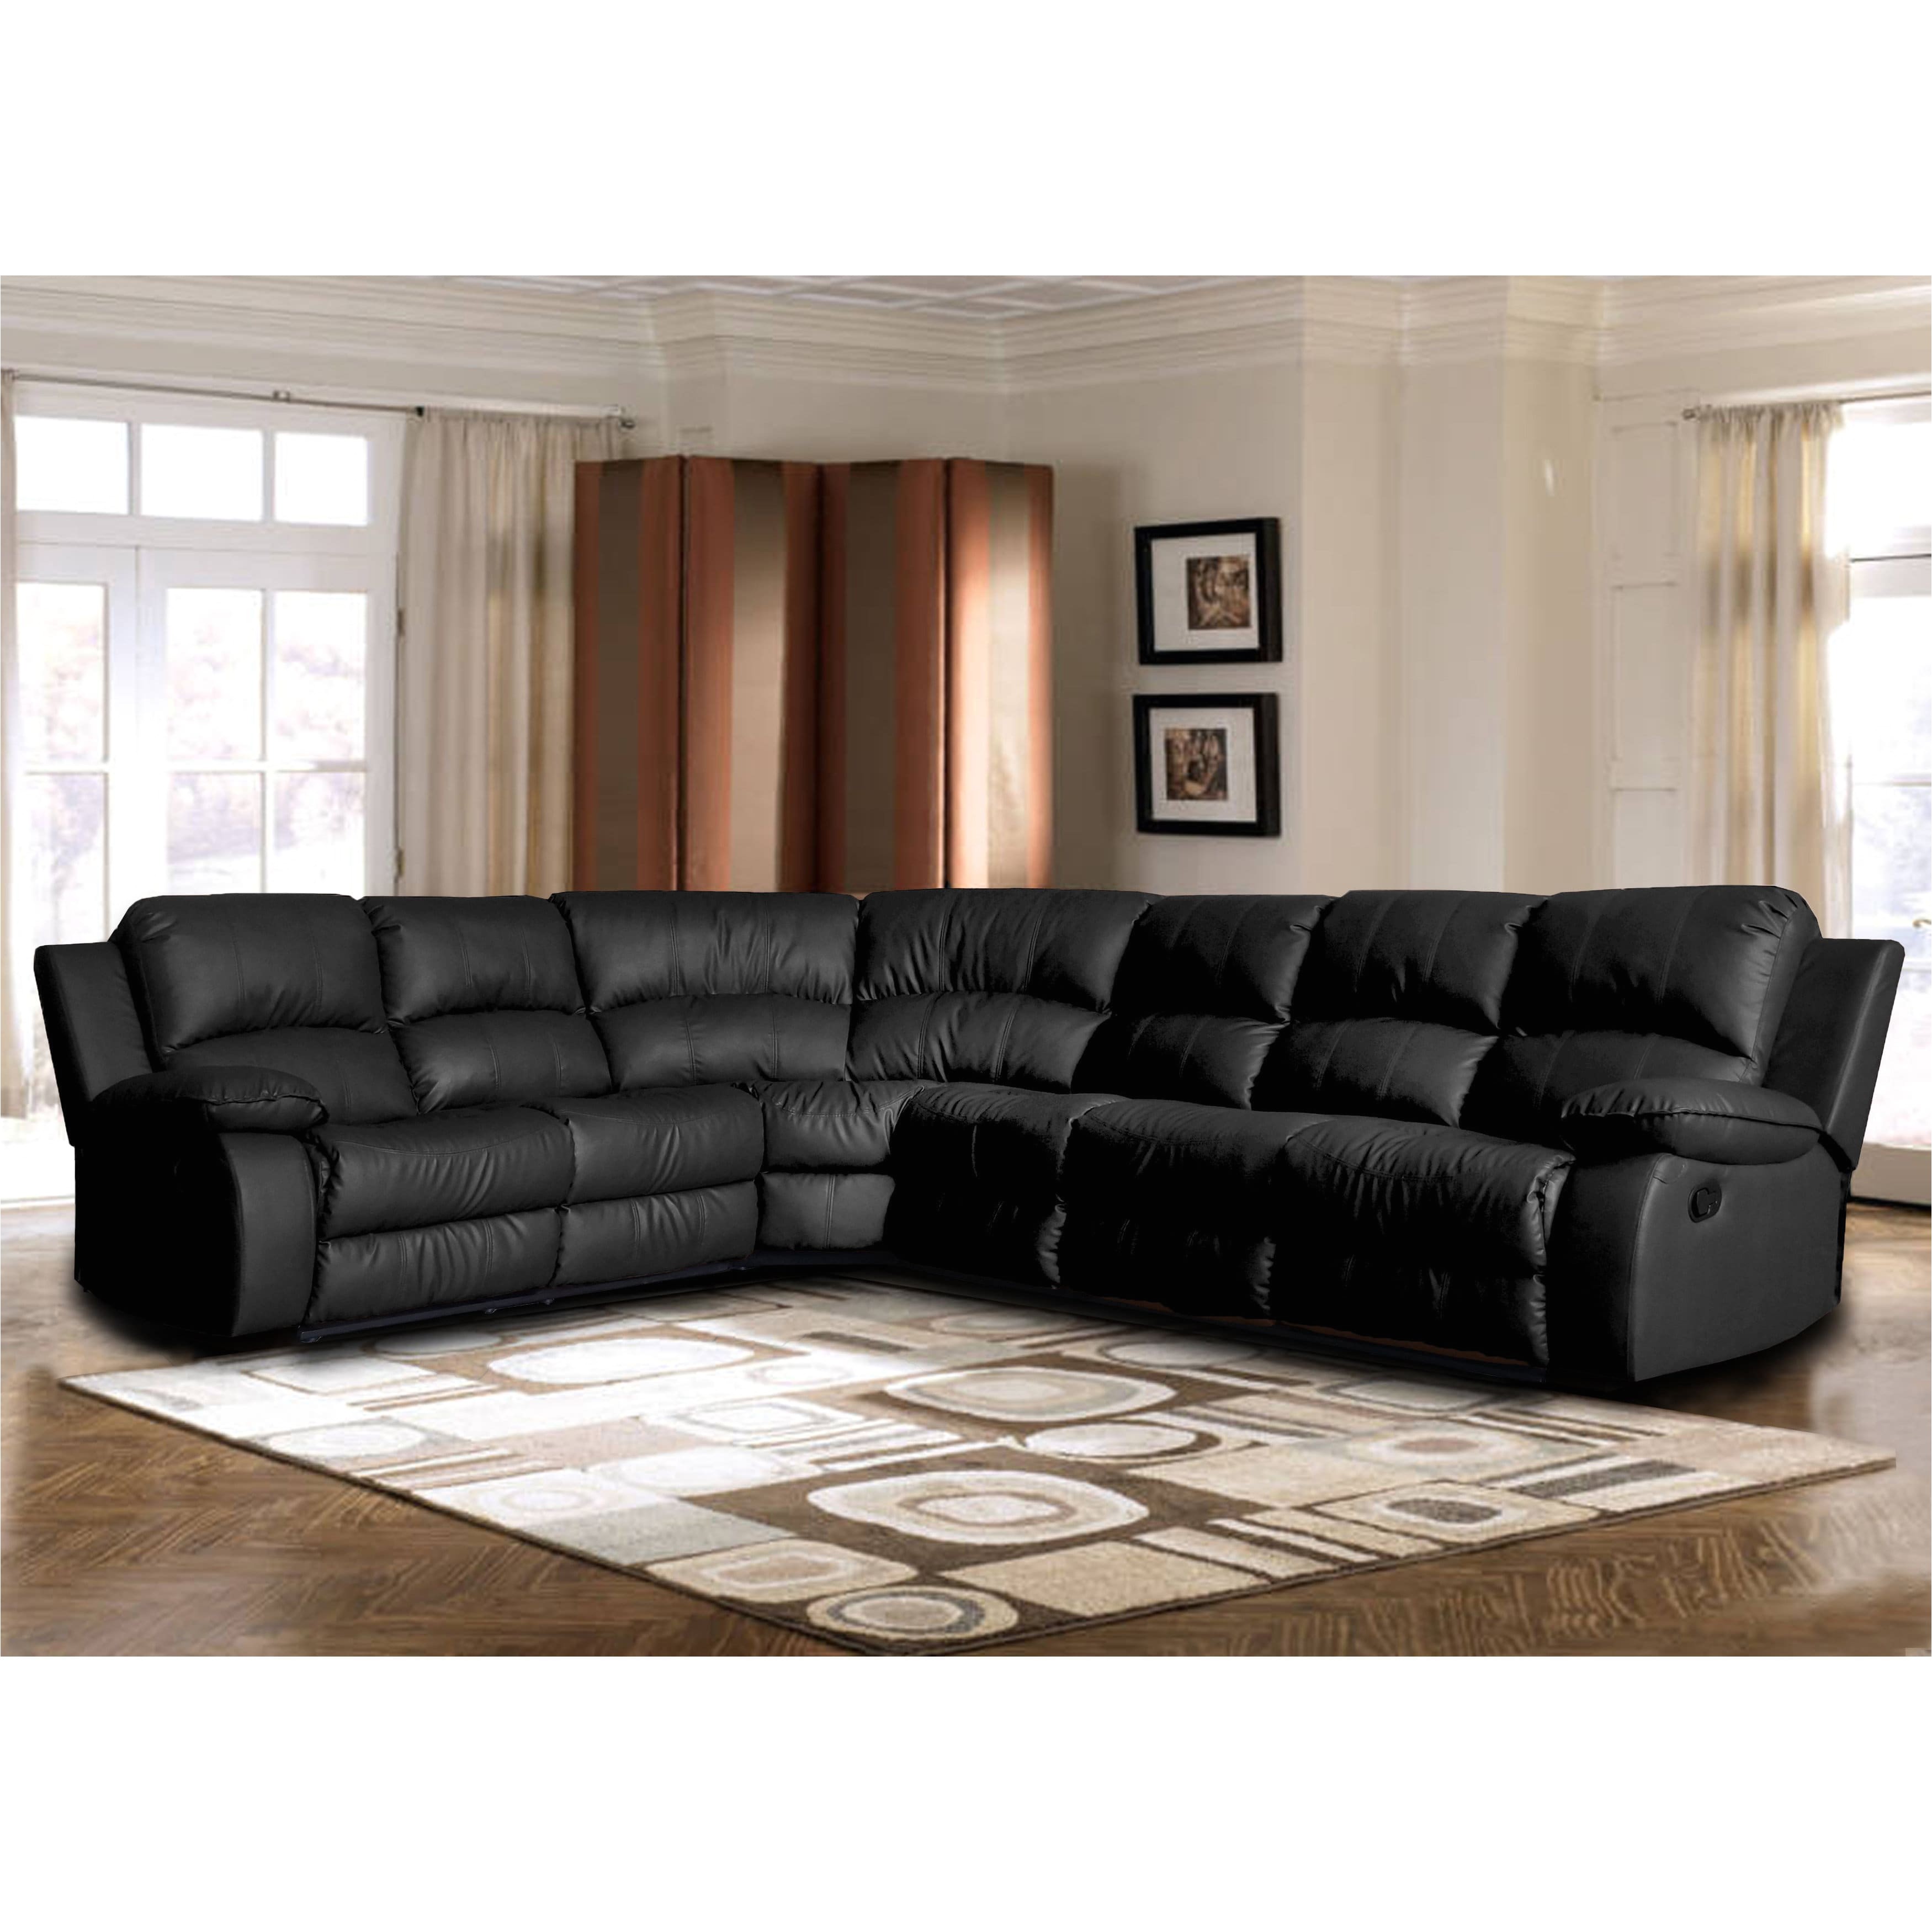 shop classic oversize and overstuffed corner bonded leather sectional with 2 reclining seats free shipping today overstock com 11853464